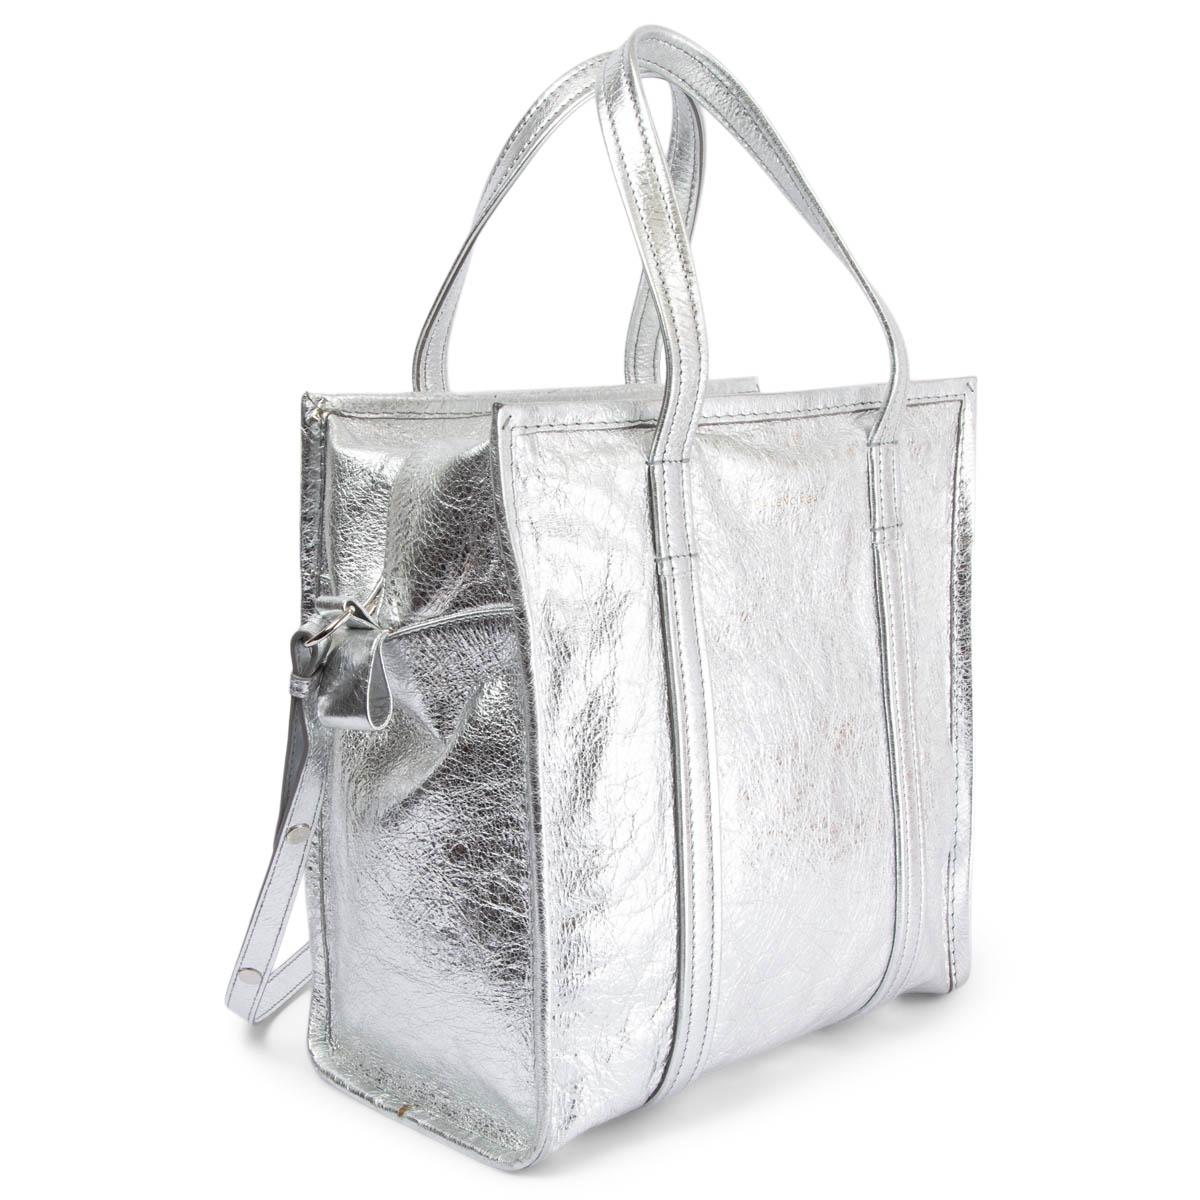 100% authentic Balenciaga Small Bazar shoulder bag in metallic silver crinkled calfskin. Lined in black canvas with one silver leather zip pocket against the back and an open pocket against the front. Comes with a detachable shoulder-strap. Has been